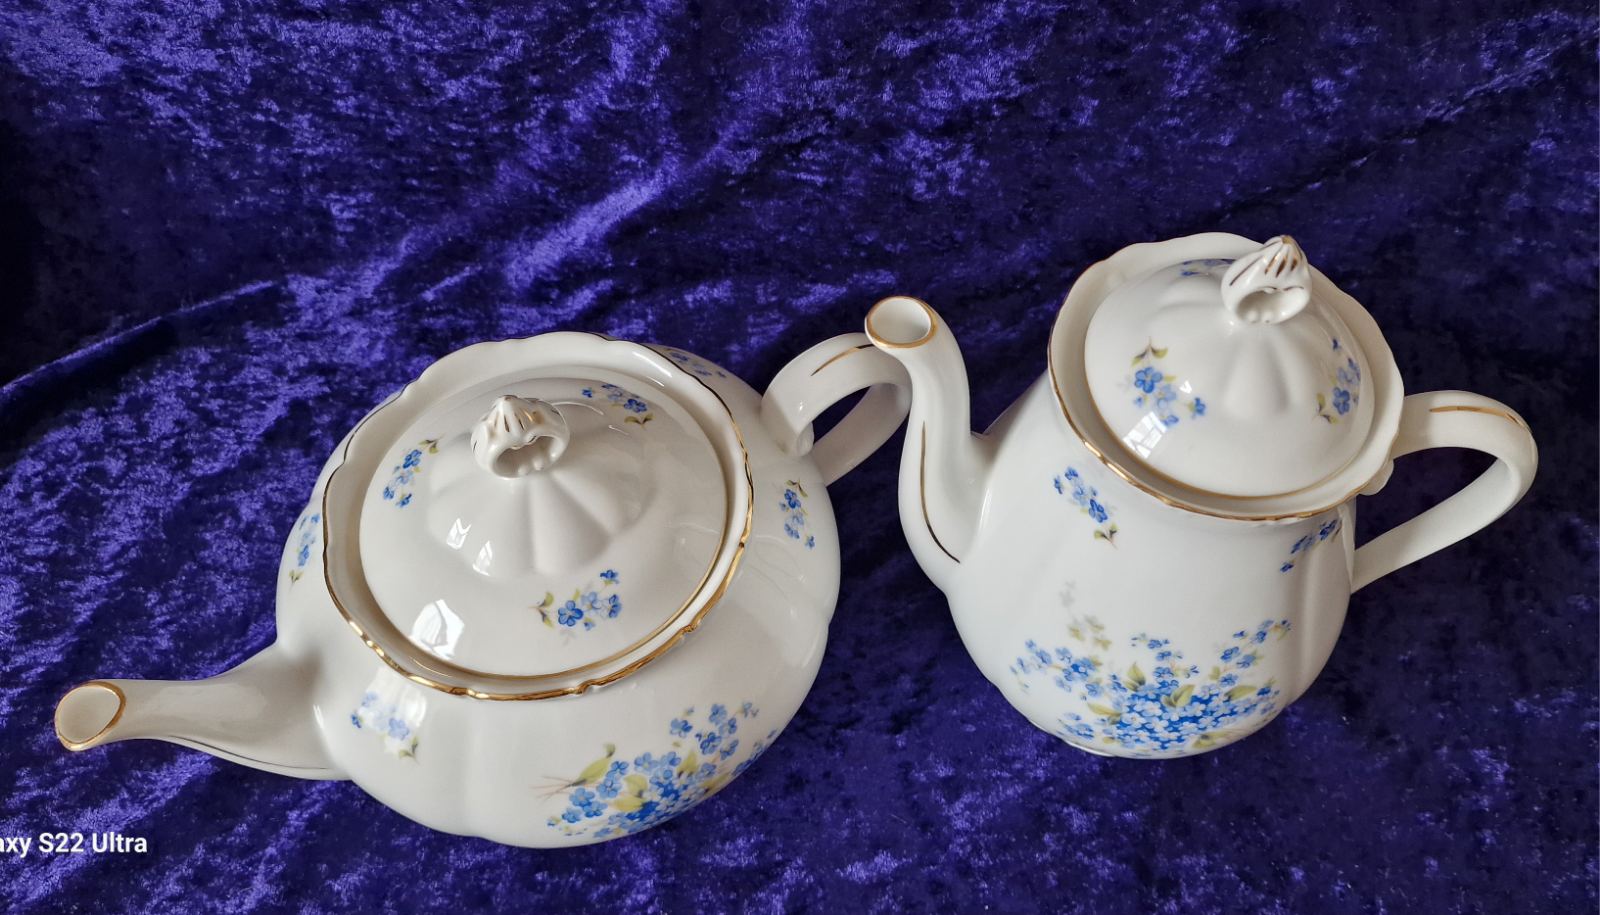 Forget-me-not tea pot by Haas & Czjzek, Czechoslovakia, white with blue flowers.